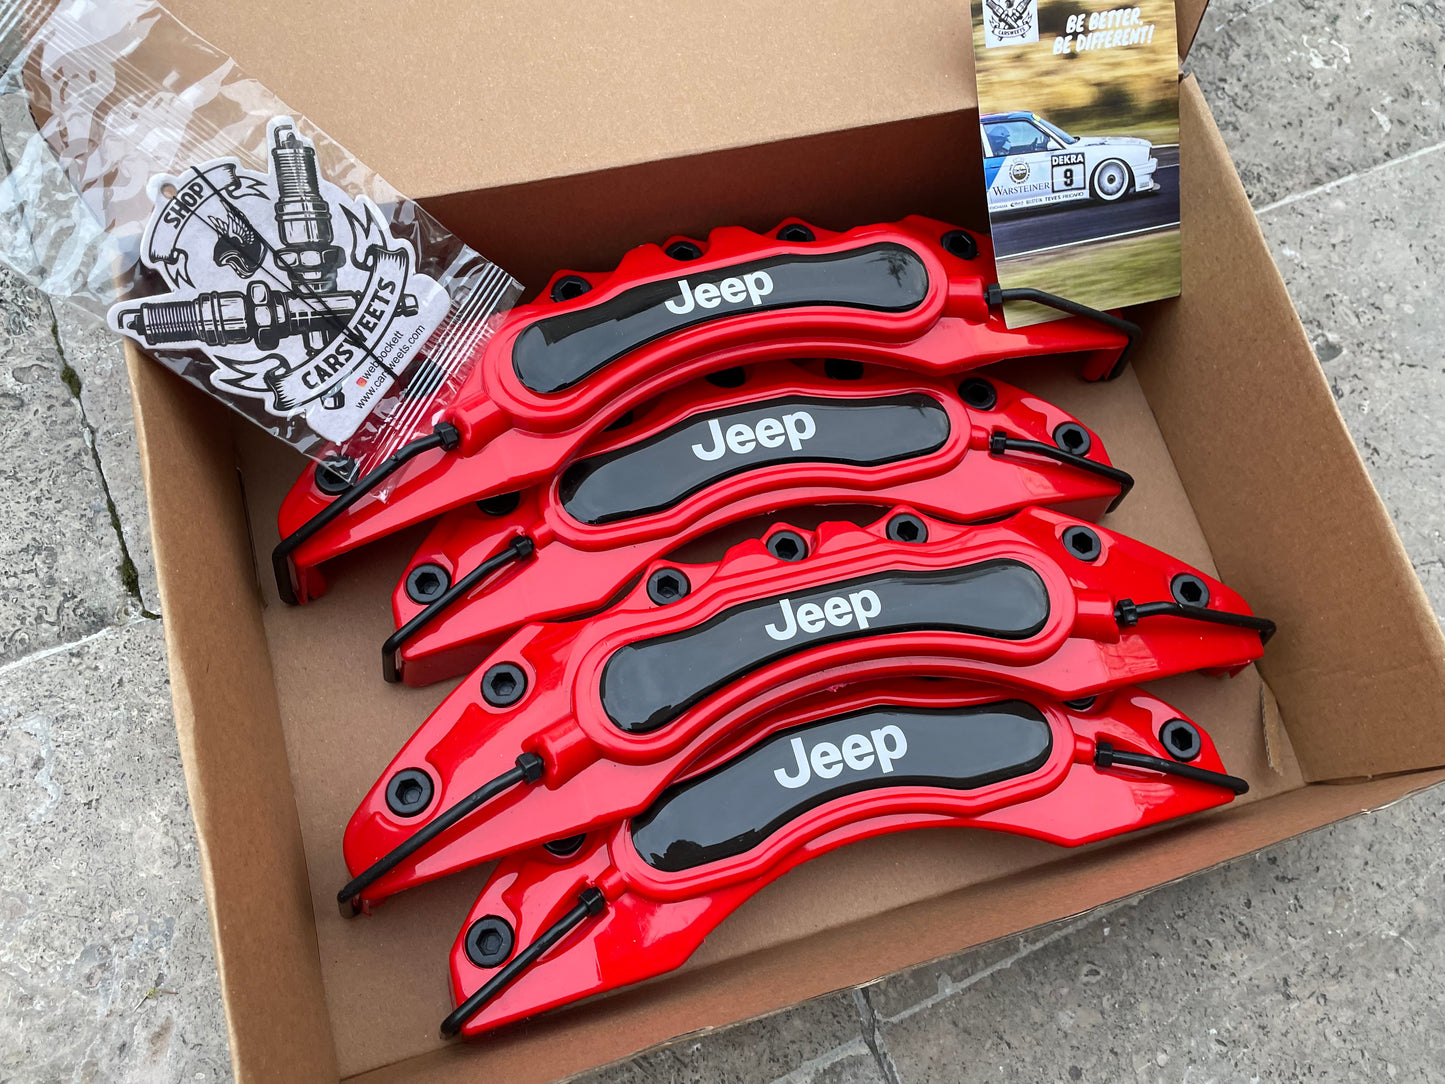 4pc Brake Caliper Covers for Jeep Red